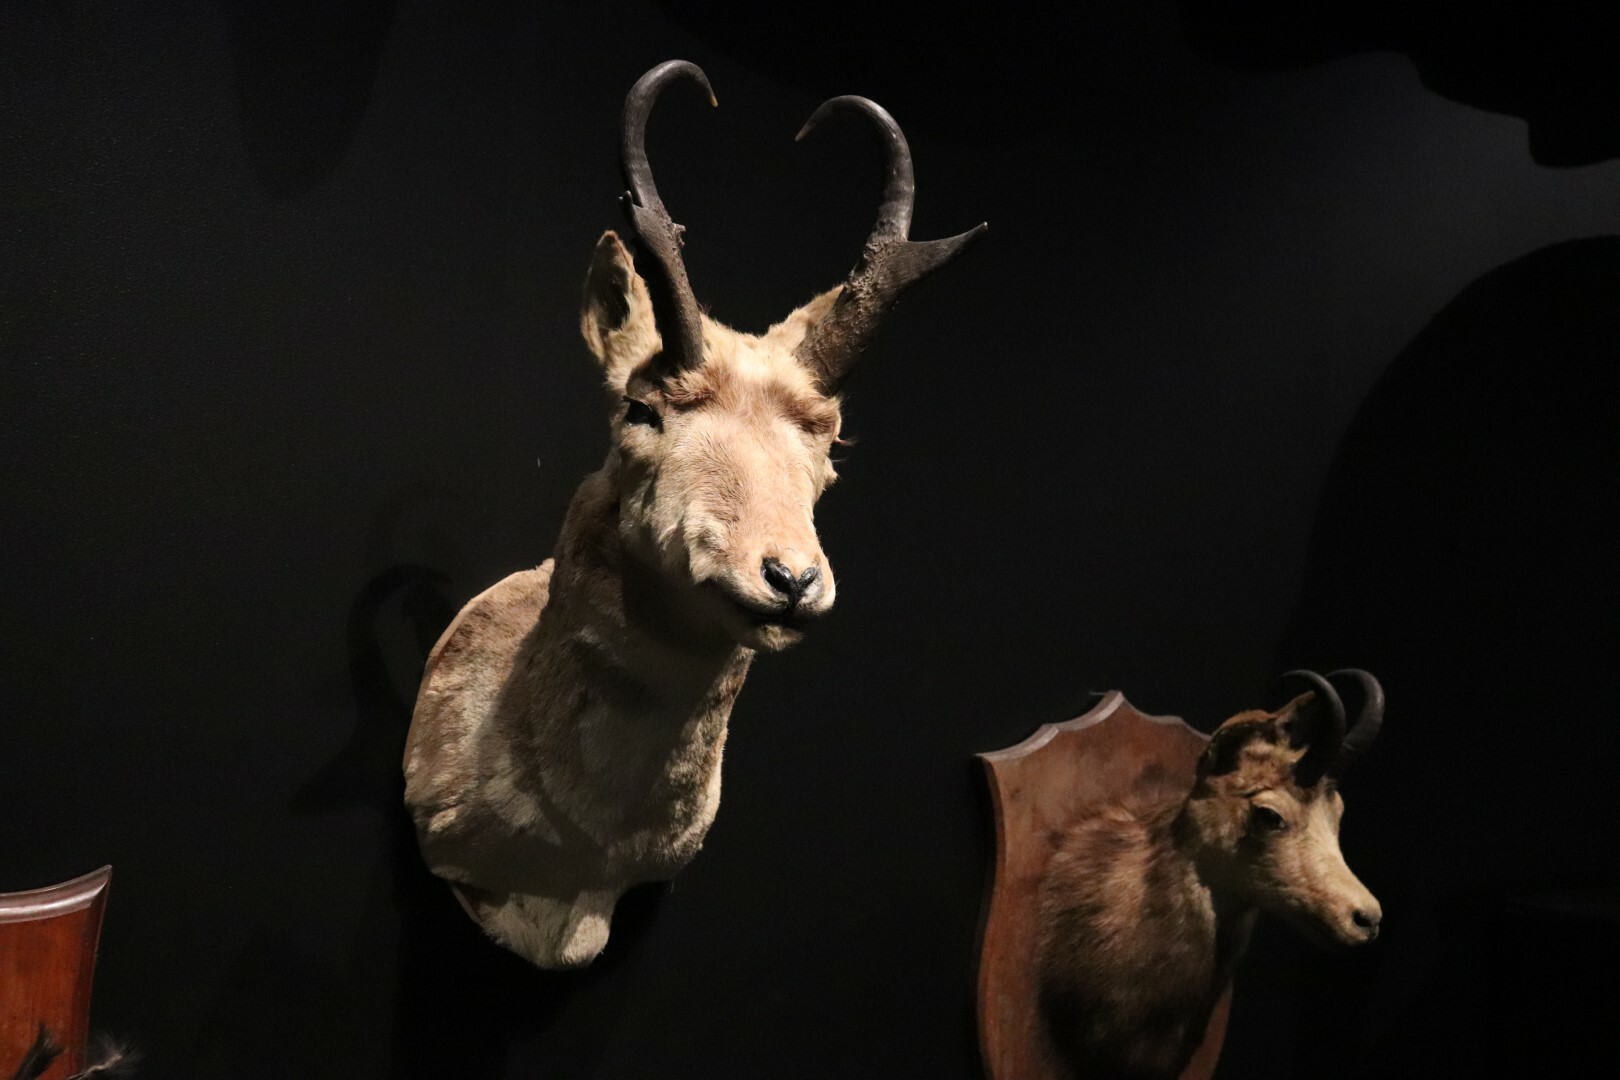 The pronghorn trophy (left) in Fur, Fangs and Feathers